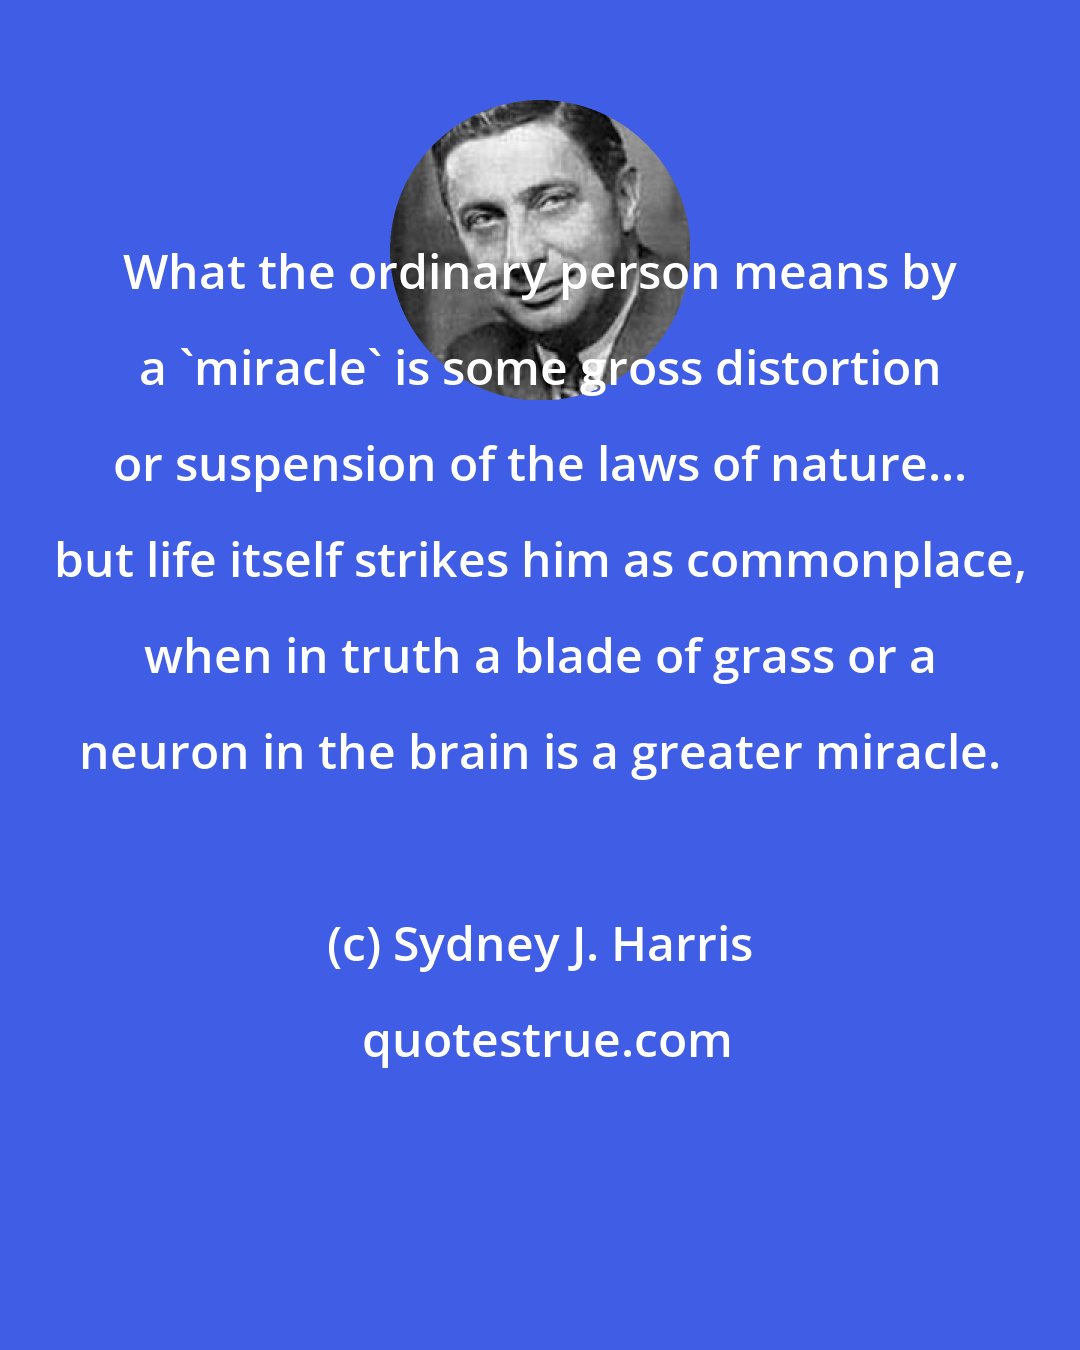 Sydney J. Harris: What the ordinary person means by a 'miracle' is some gross distortion or suspension of the laws of nature... but life itself strikes him as commonplace, when in truth a blade of grass or a neuron in the brain is a greater miracle.